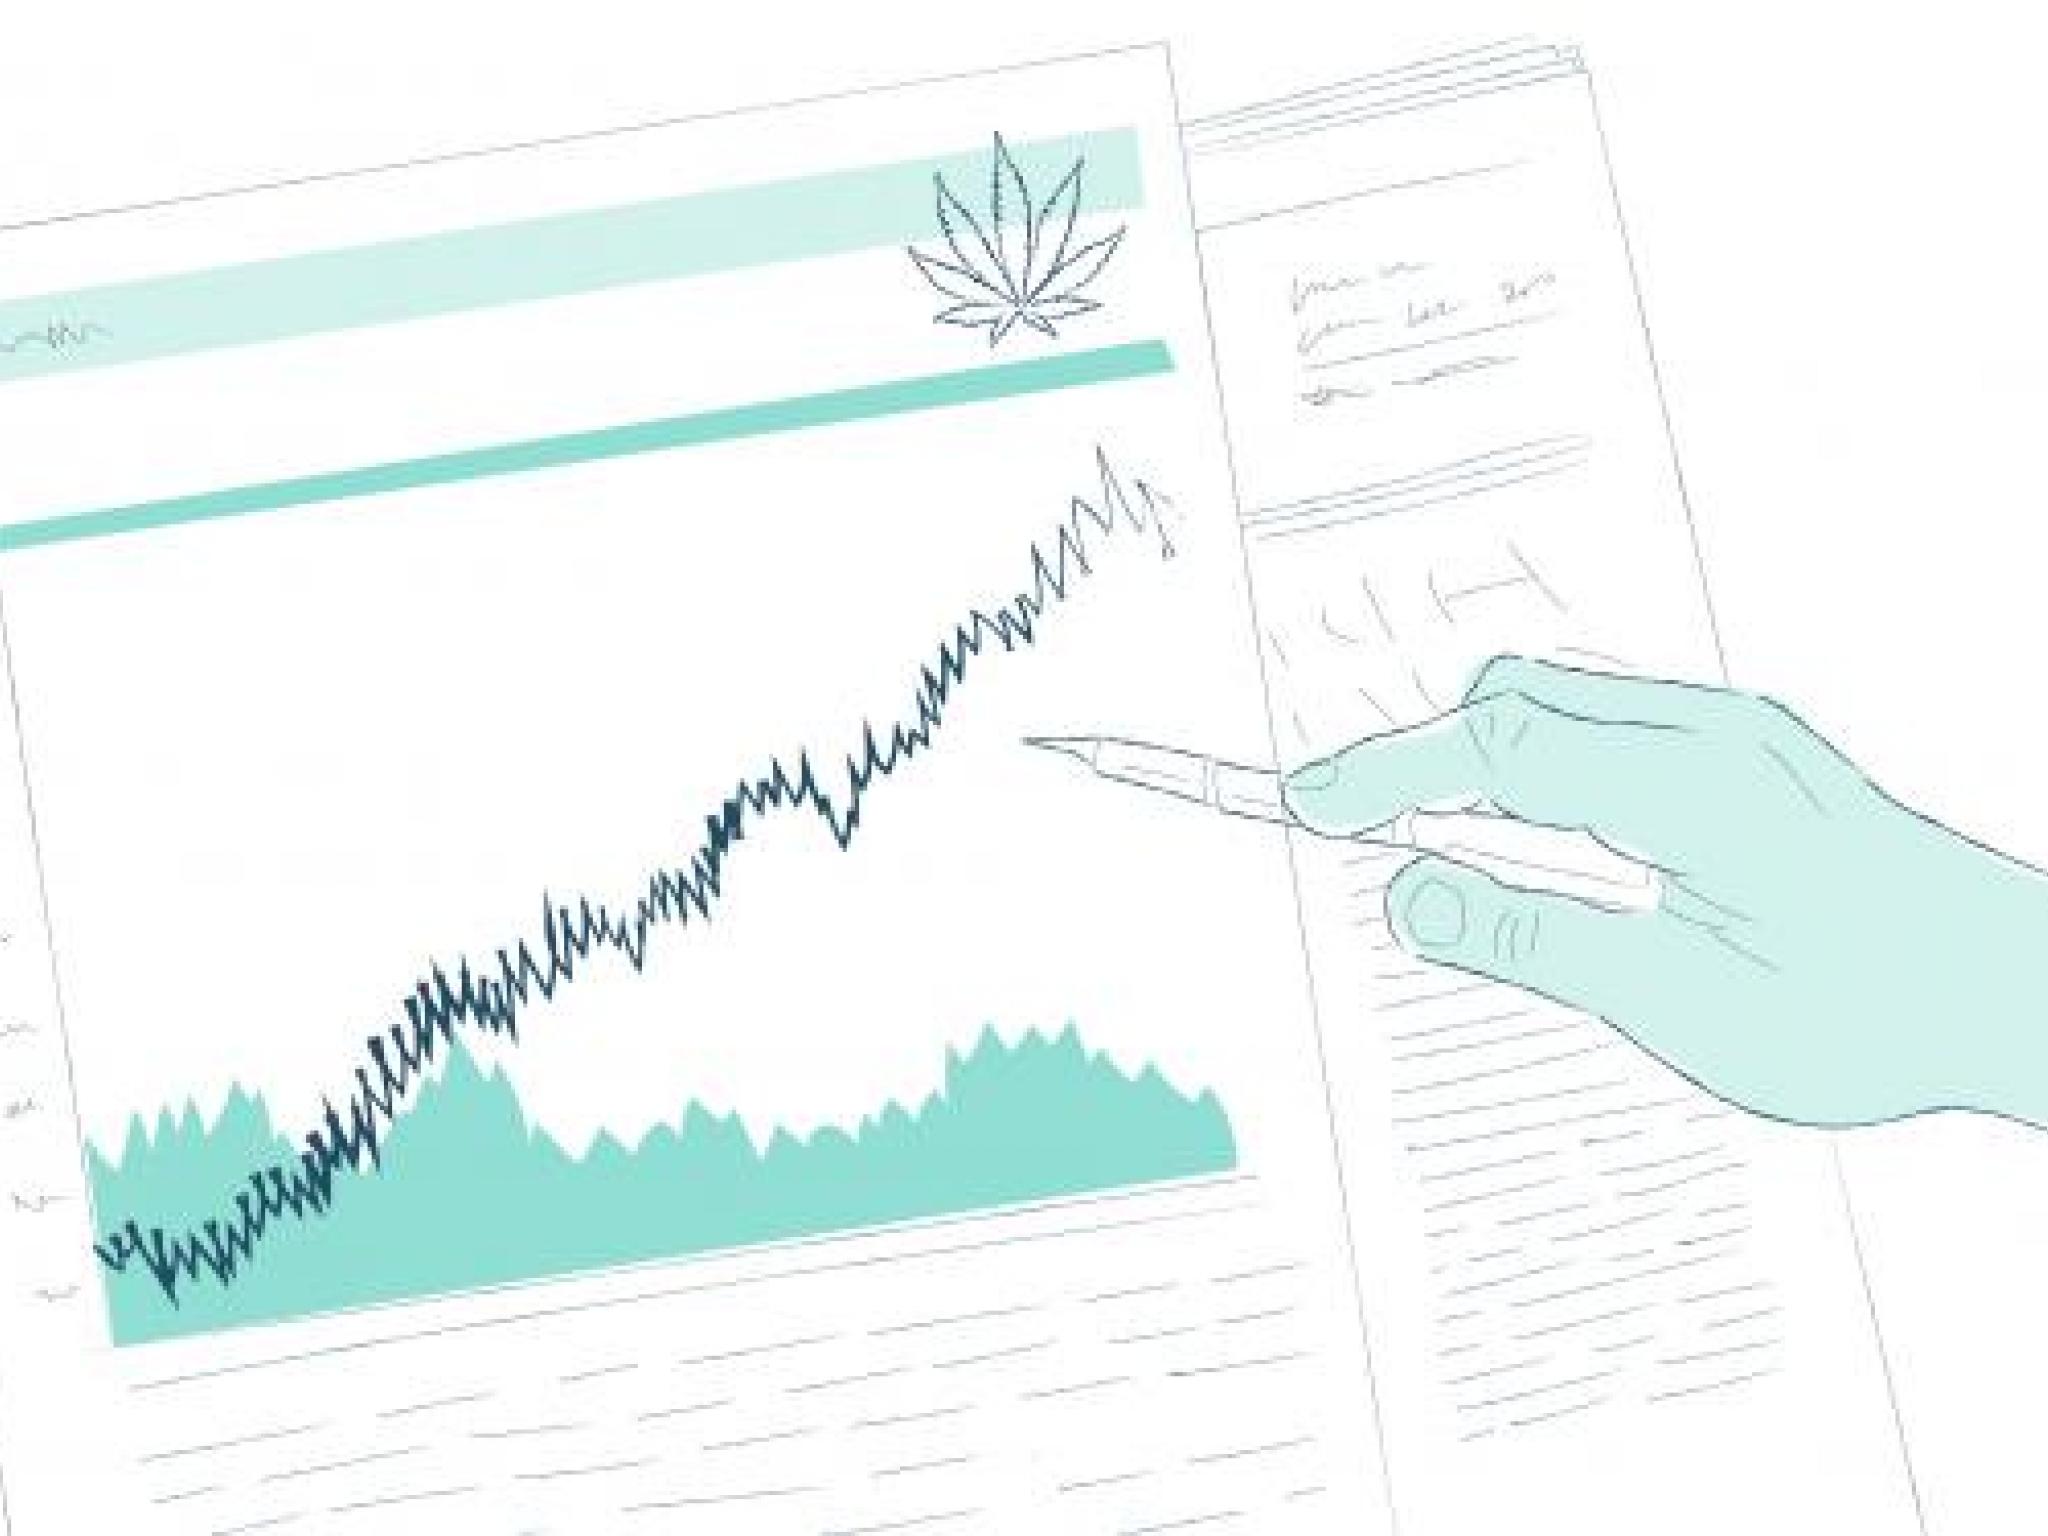  cannabis-stock-gainers-and-losers-from-june-17-2020 